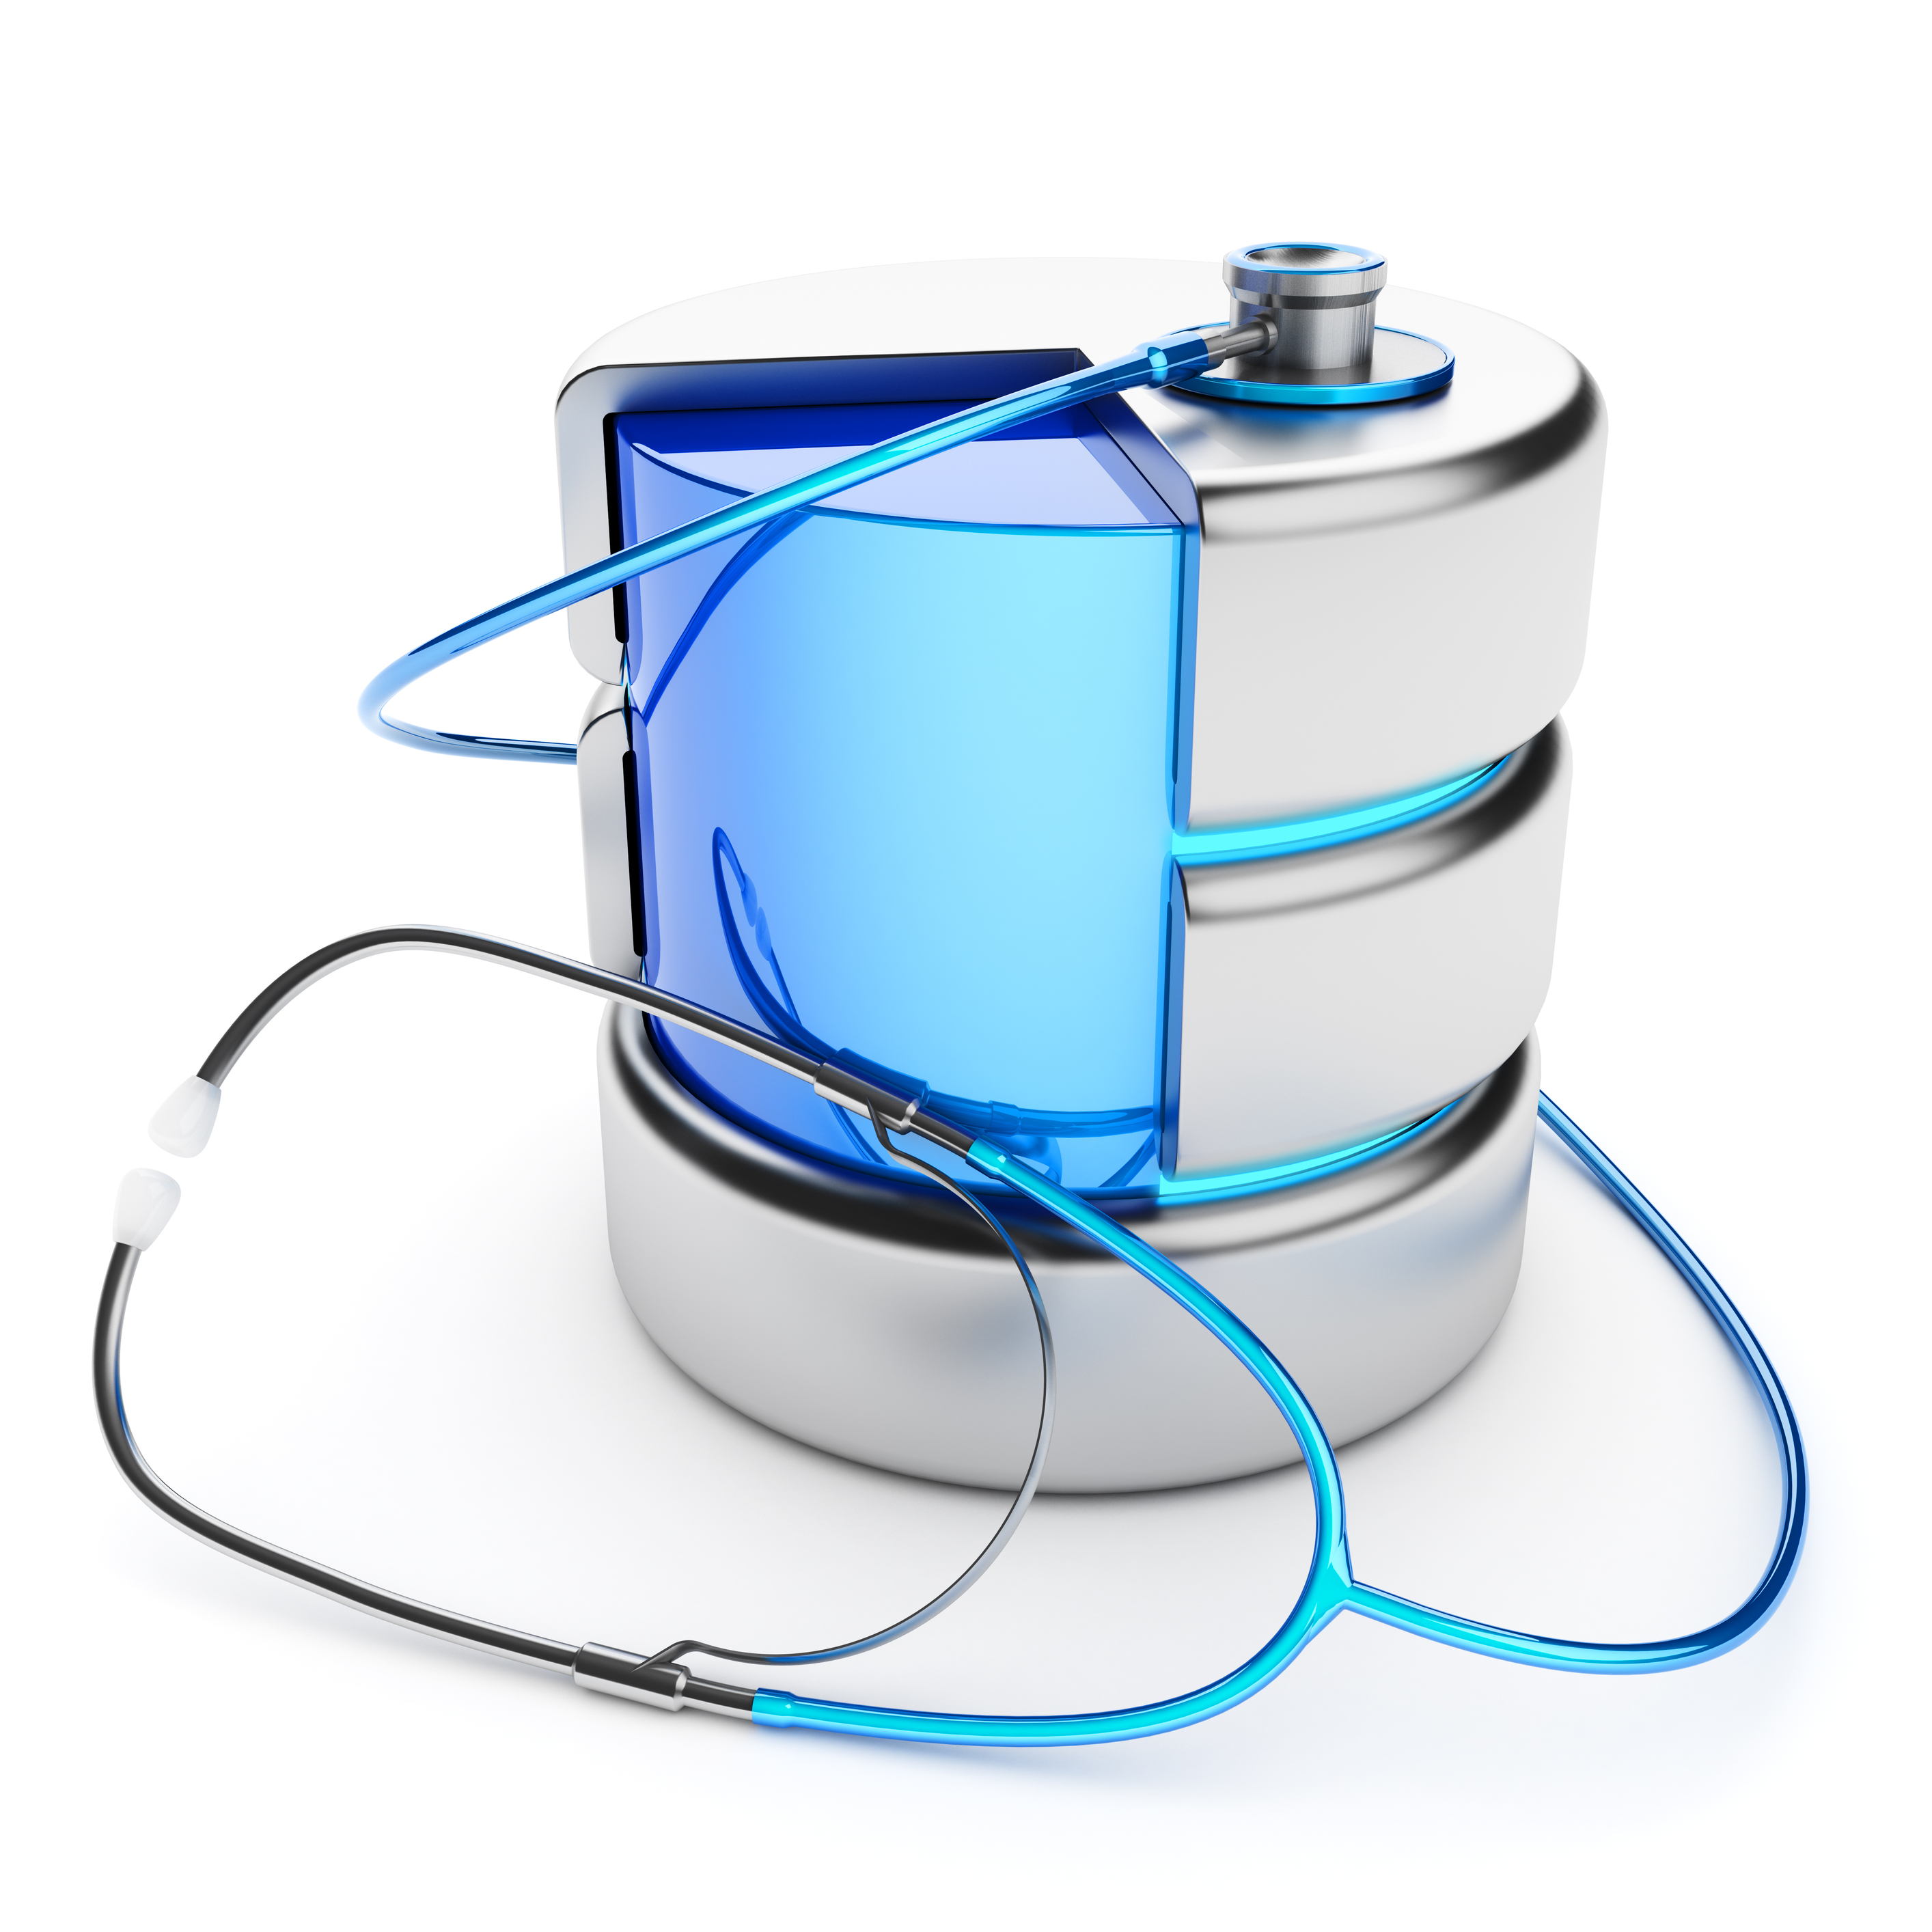 Healthcare Data Storage: 4 flaws to avoid